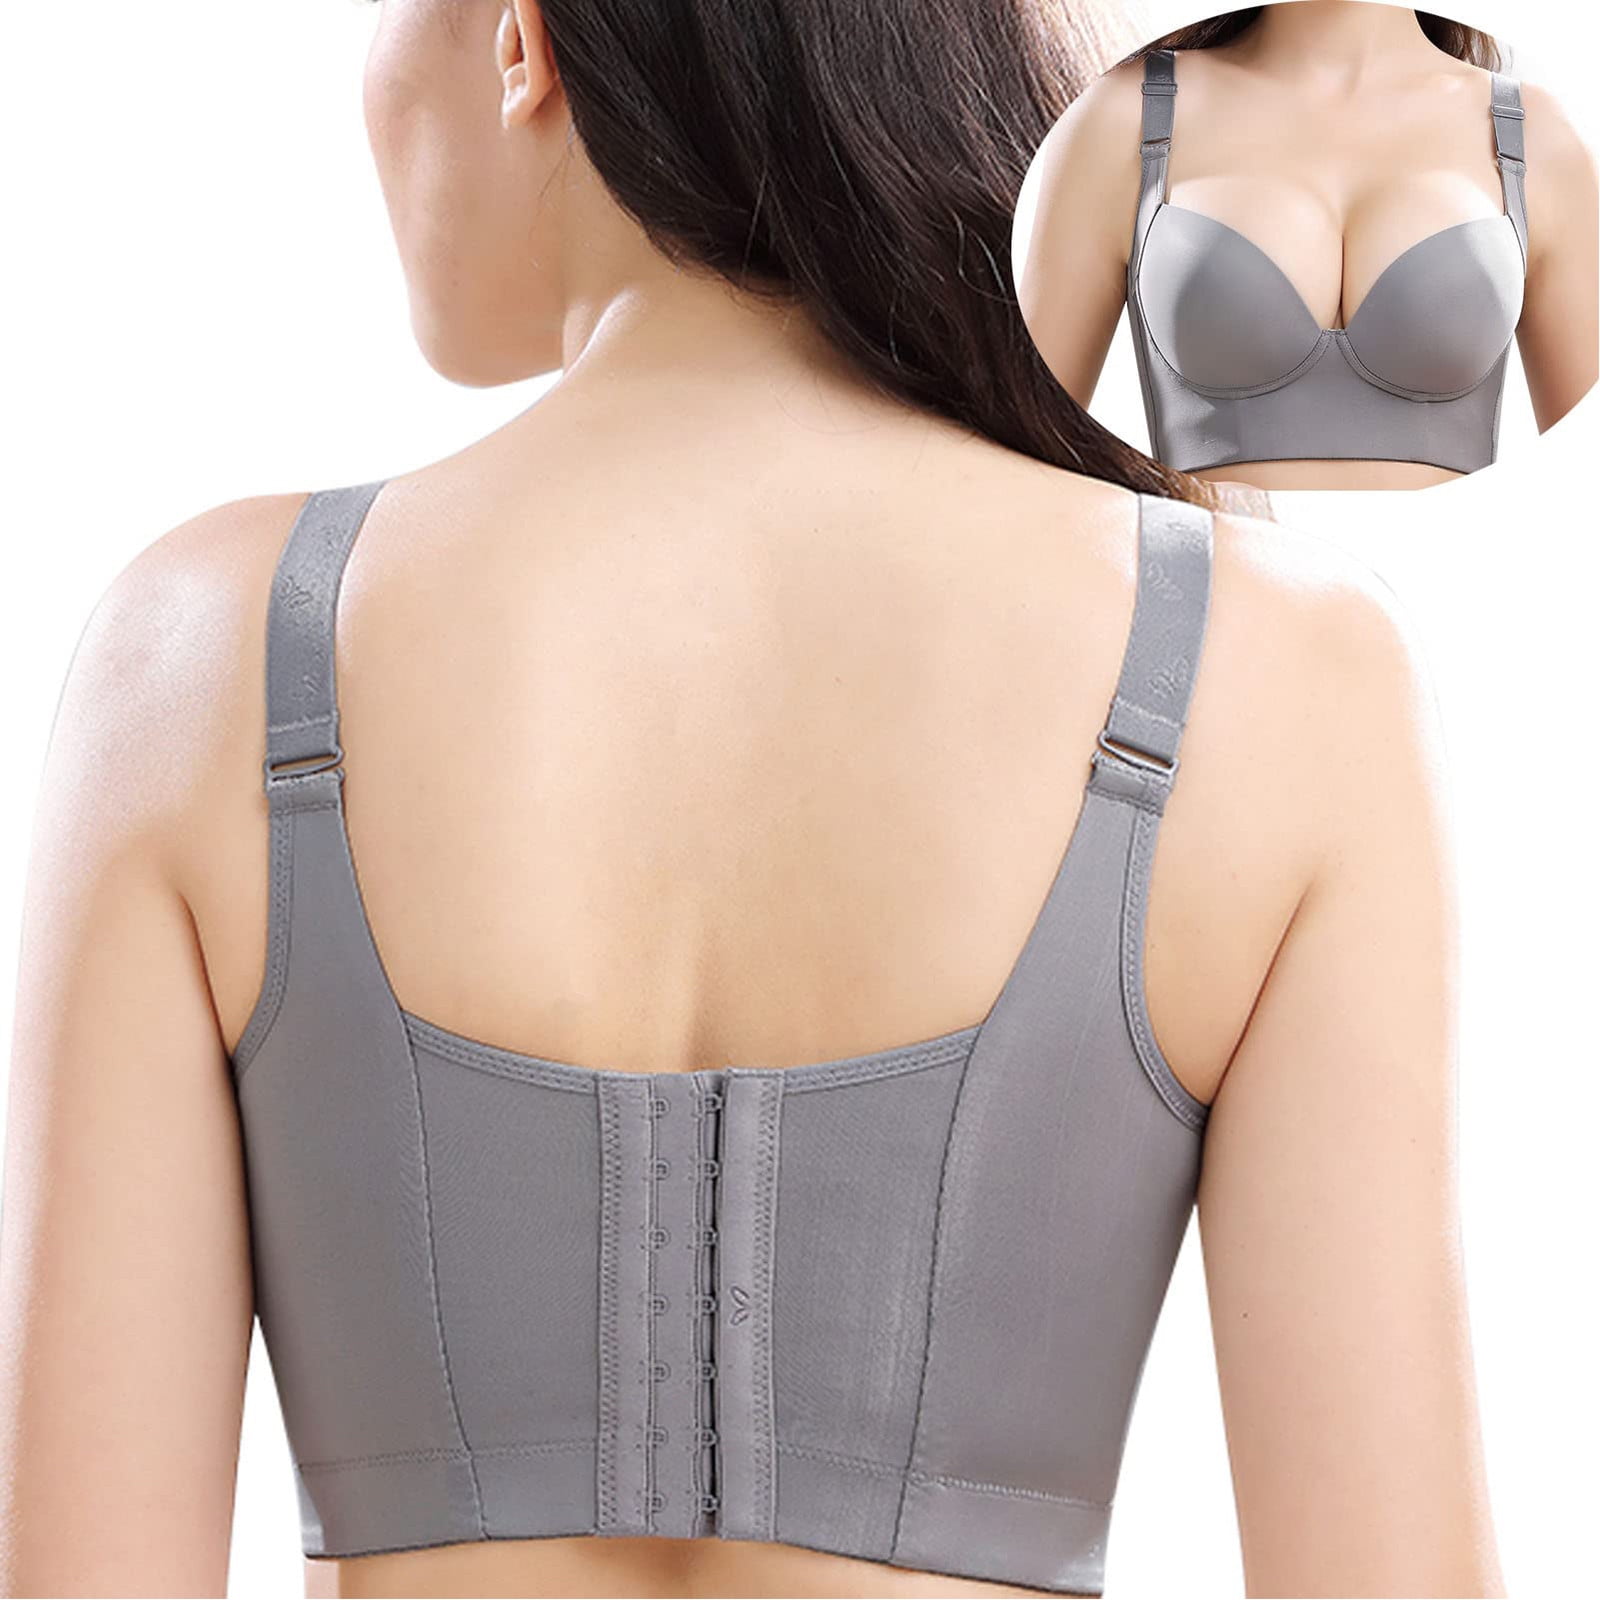 Pumping Bra Hands Free Sports Bras Women Fashion No Rims Wireless  Non-Marking Adjustable Yoga Sports Bra Lingerie for Women Plus Size Sexy Lingerie  Clearance on Sales Gray,S 